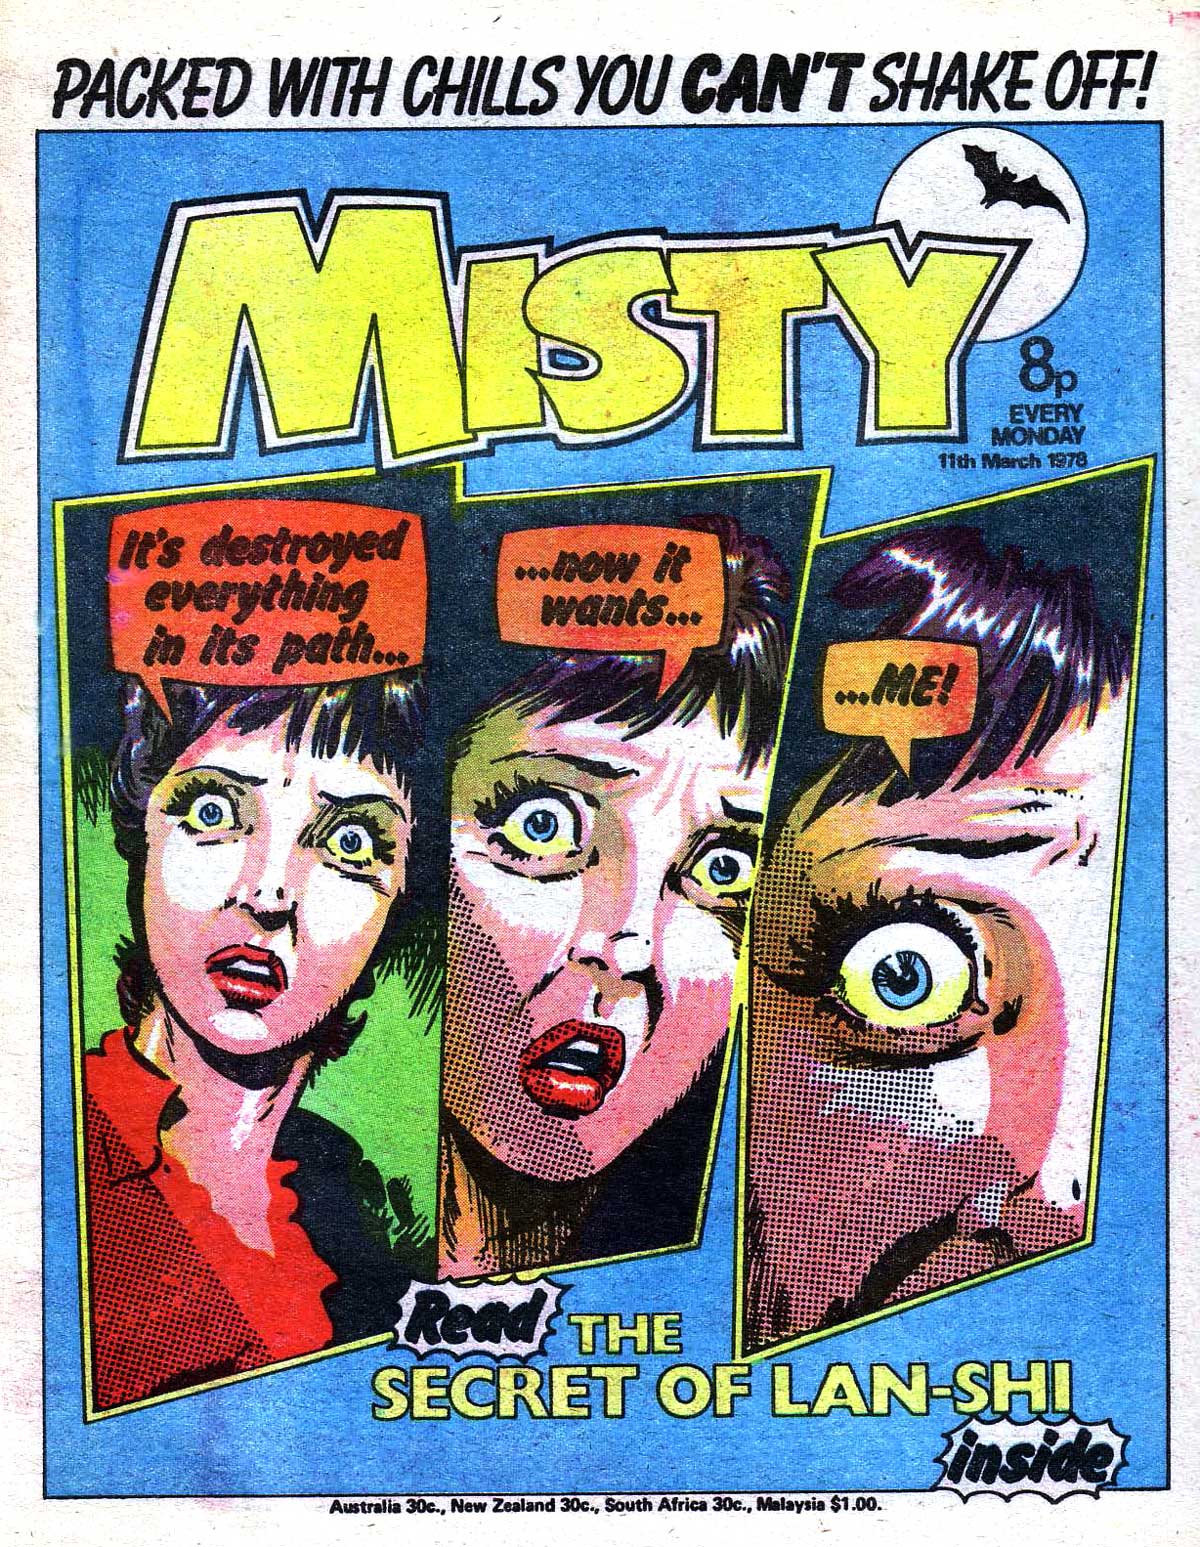 Misty Issue 6 - Cover